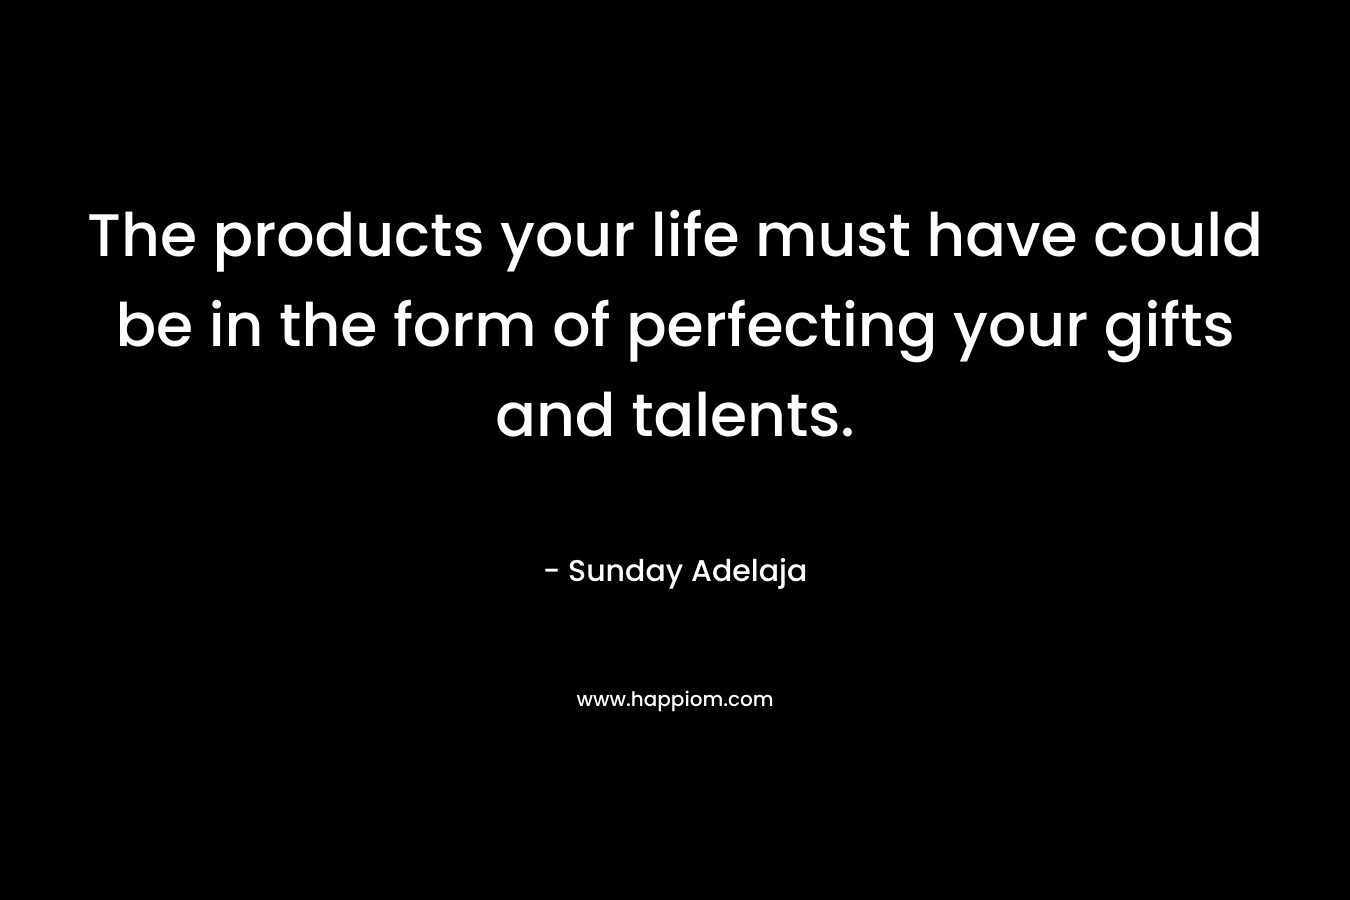 The products your life must have could be in the form of perfecting your gifts and talents.